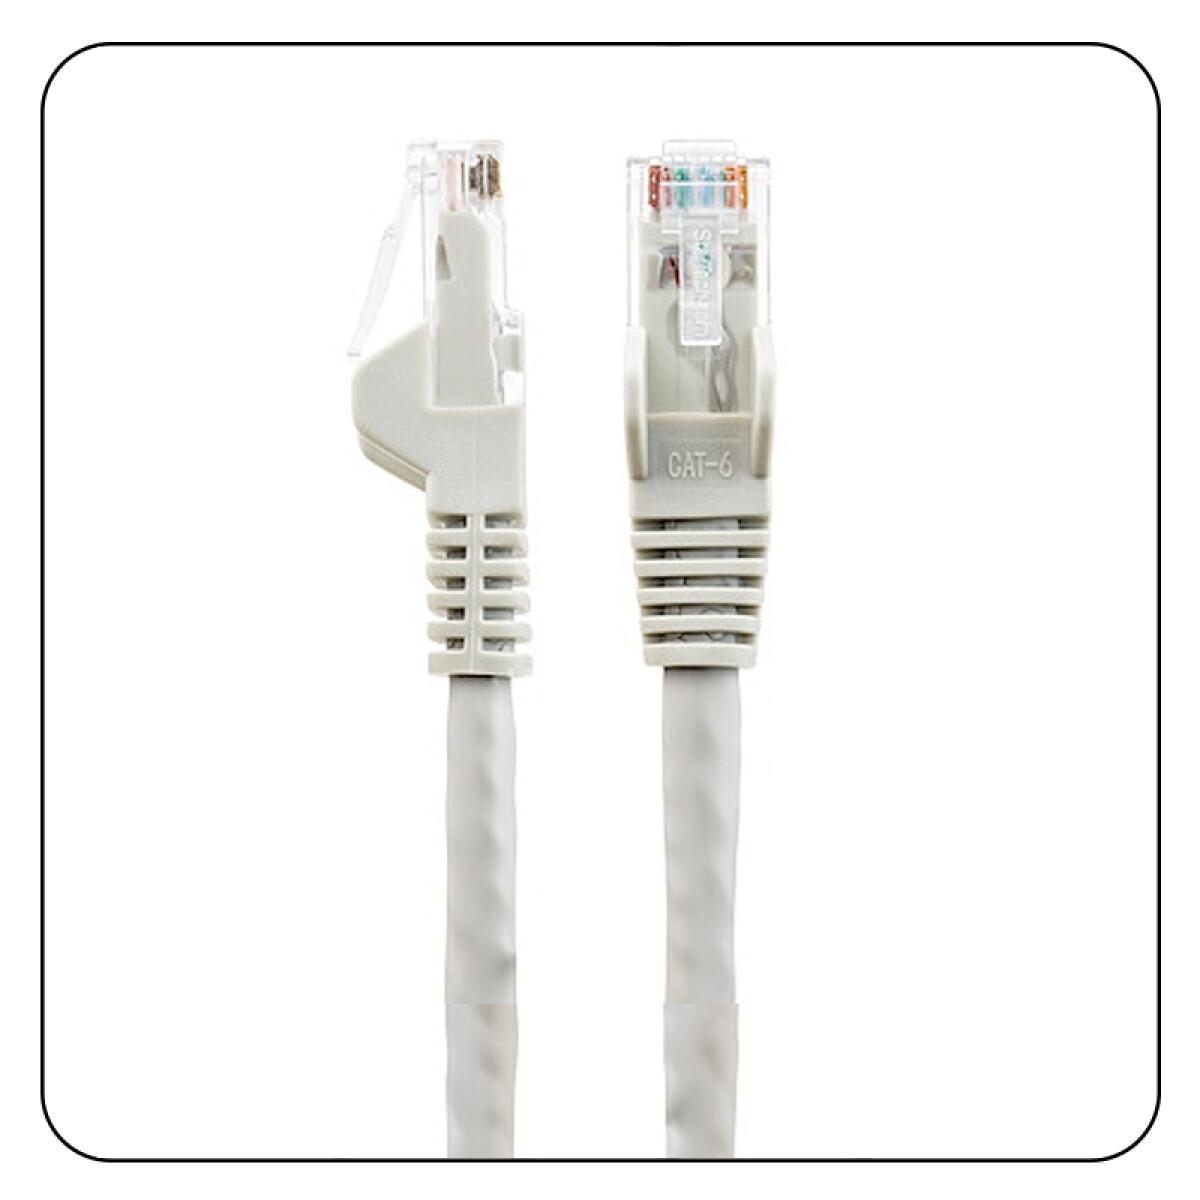 Cable de red Patch Cord CAT6 2M blanco Kolke - Unica 